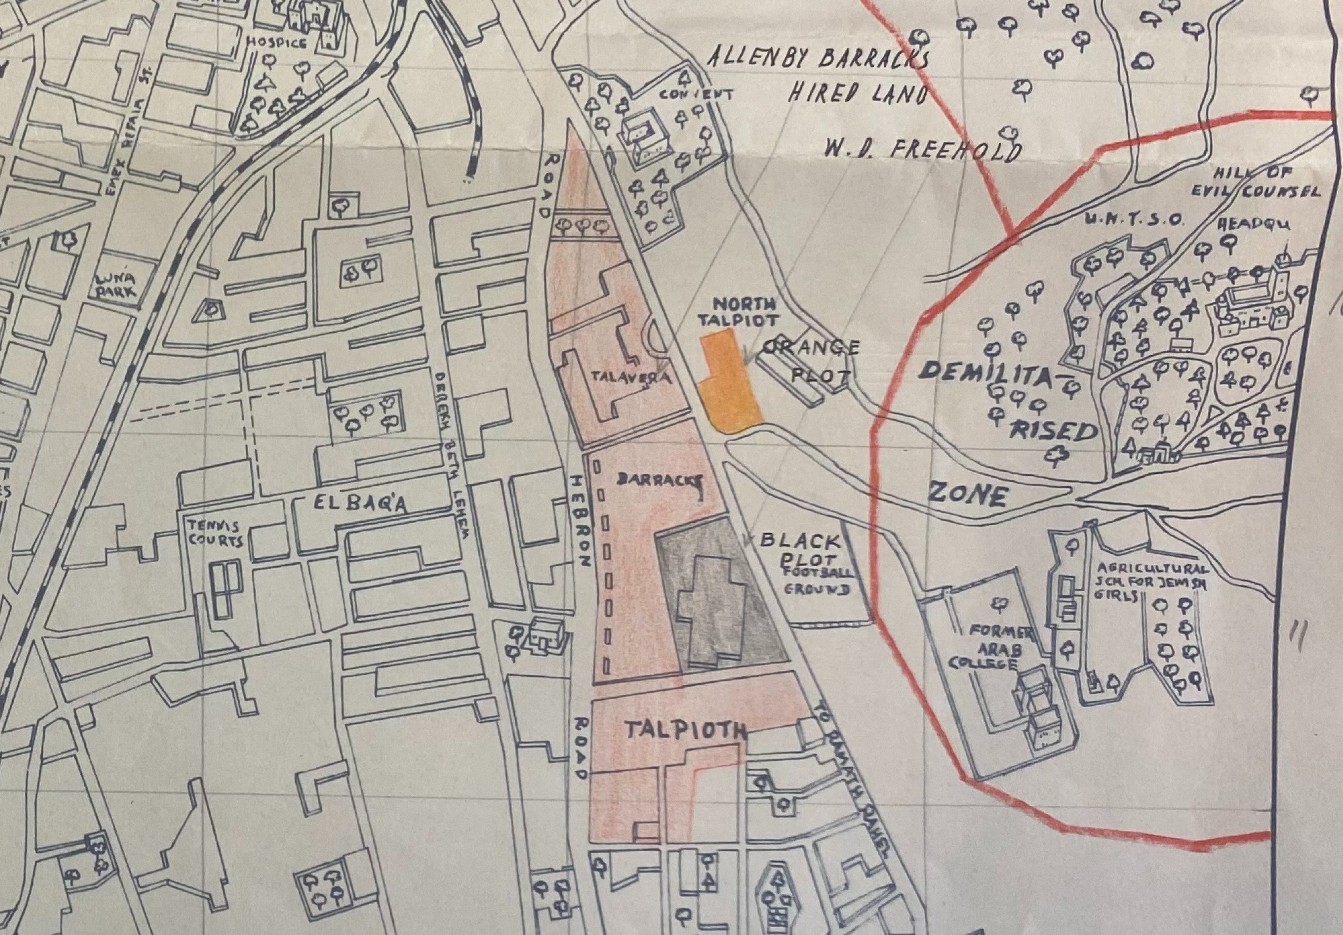 A 1959 map of Jerusalem showing the Orange Plot found in Foreign Office documents at the National Archive in Kew (National Archive)